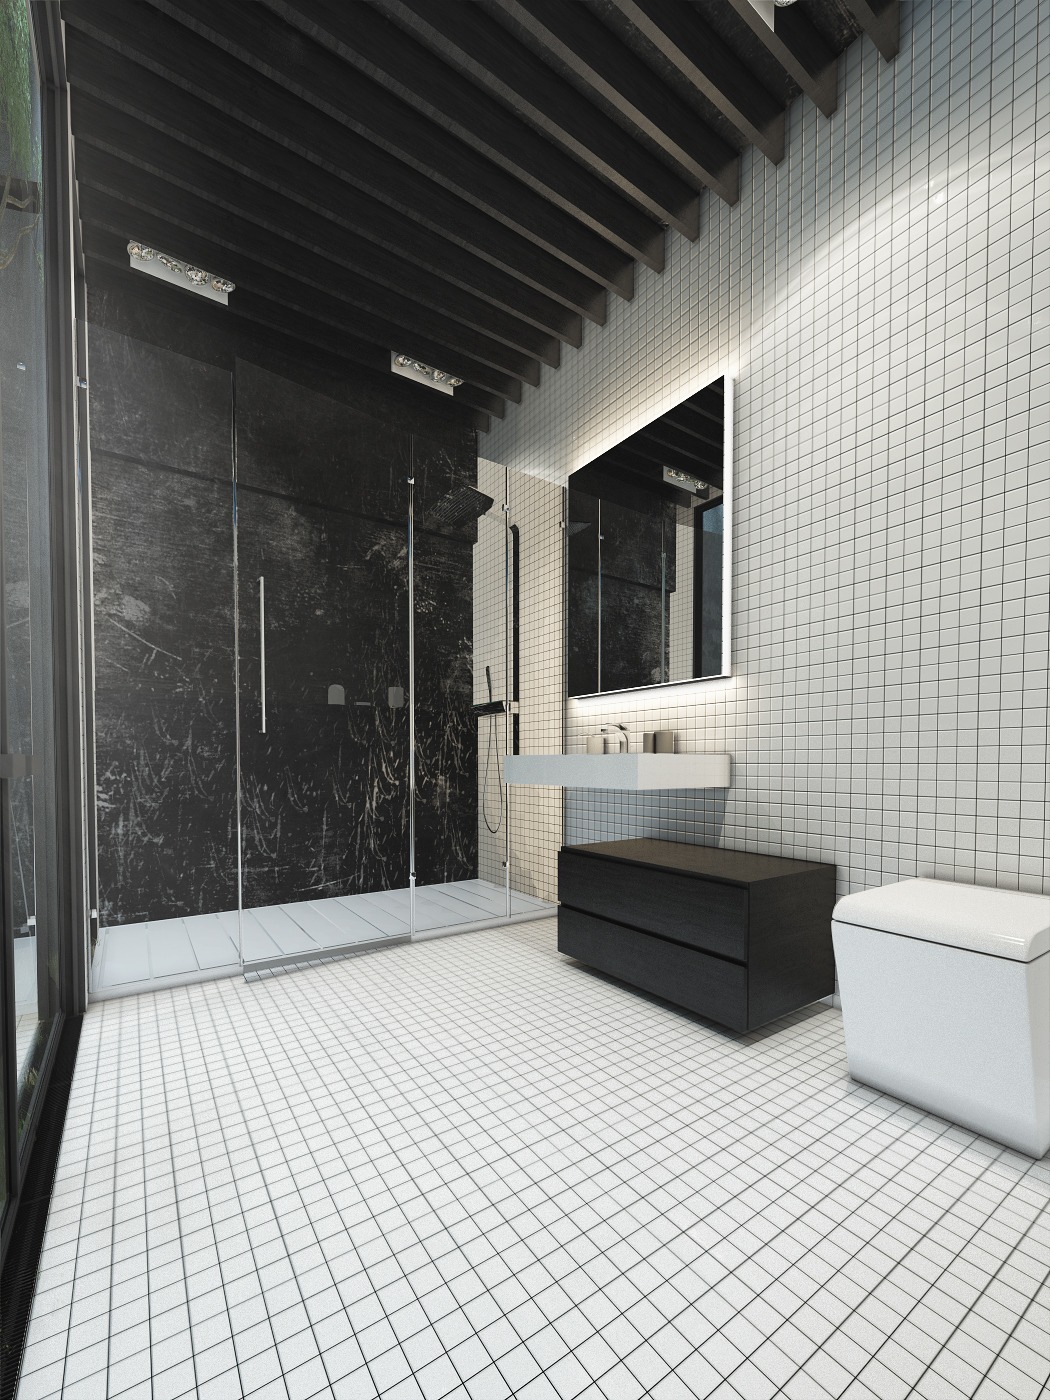 white tile bathroom "width =" 1050 "height =" 1400 "srcset =" https://mileray.com/wp-content/uploads/2020/05/1588516500_599_Decorating-Dark-and-White-Bathroom-Ideas-With-a-Cool-Design.jpg 1050w, https: //mileray.com/wp-content/uploads/2016/09/white-tile-bathroom-Stanislav-Kaminskyi-225x300.jpg 225w, https://mileray.com/wp-content/uploads/2016/09/white -fliesen-bad-Stanislav-Kaminskyi-768x1024.jpg 768w, https://mileray.com/wp-content/uploads/2016/09/white-tile-bathroom-Stanislav-Kaminskyi-696x928.jpg 696w, https: / /mileray.com/wp-content/uploads/2016/09/white-tile-bathroom-Stanislav-Kaminskyi-315x420.jpg 315w "Sizes =" (maximum width: 1050px) 100vw, 1050px